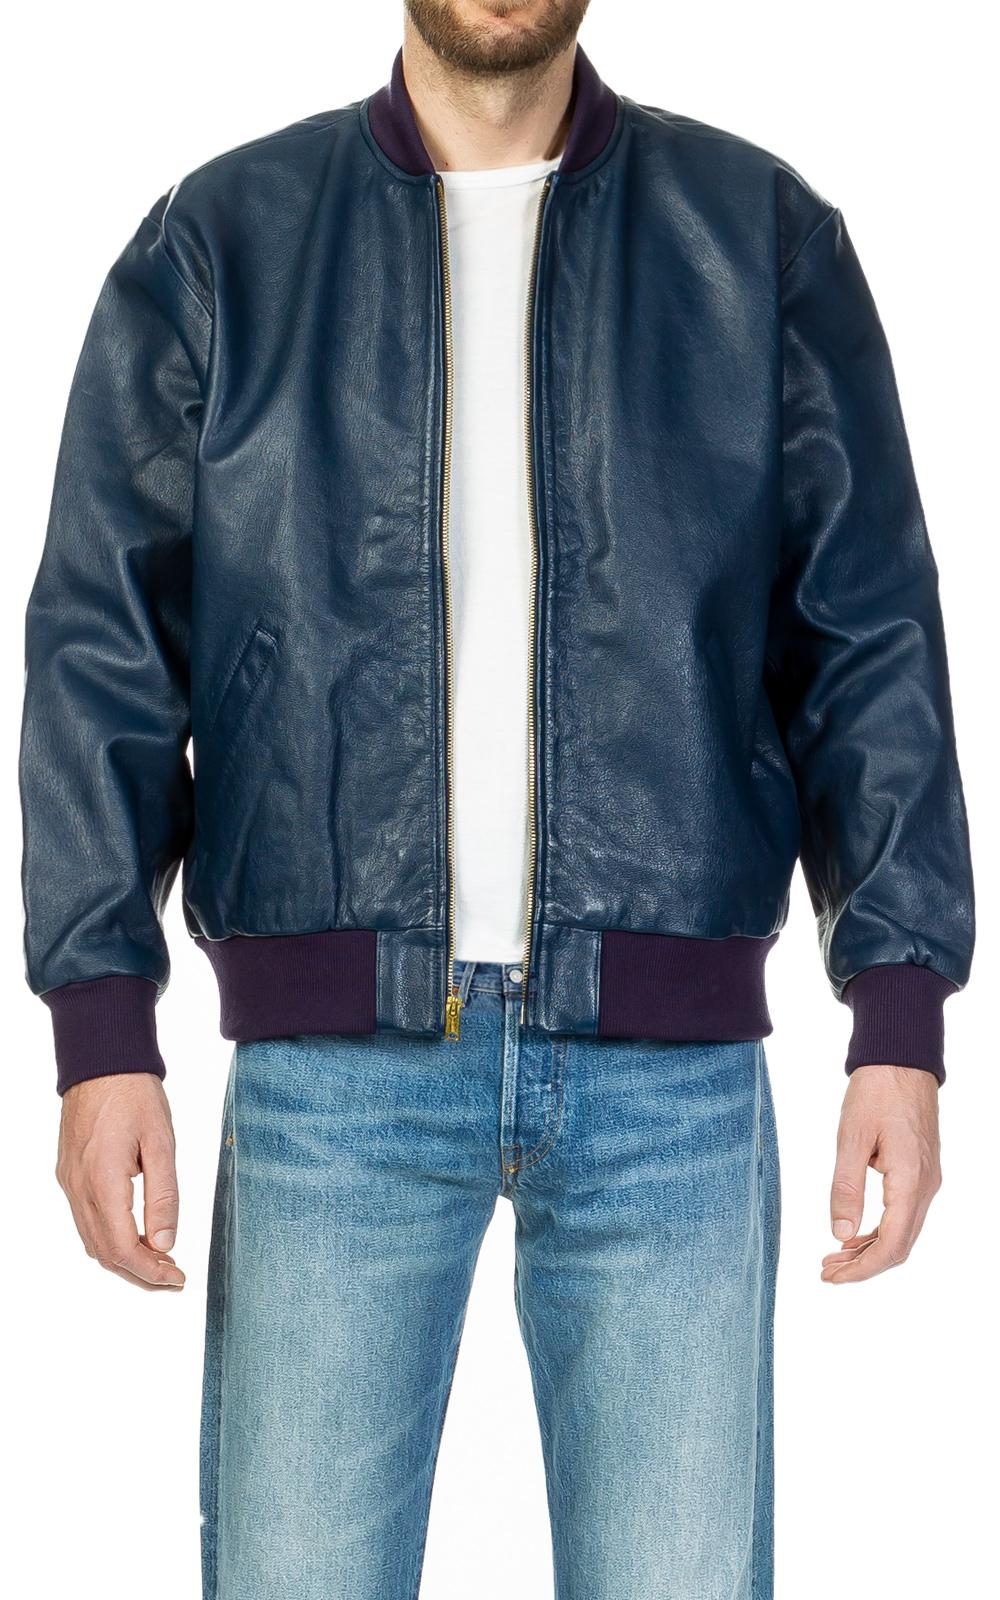 levi's blue leather jacket Cheaper Than Retail Price> Buy Clothing,  Accessories and lifestyle products for women & men -